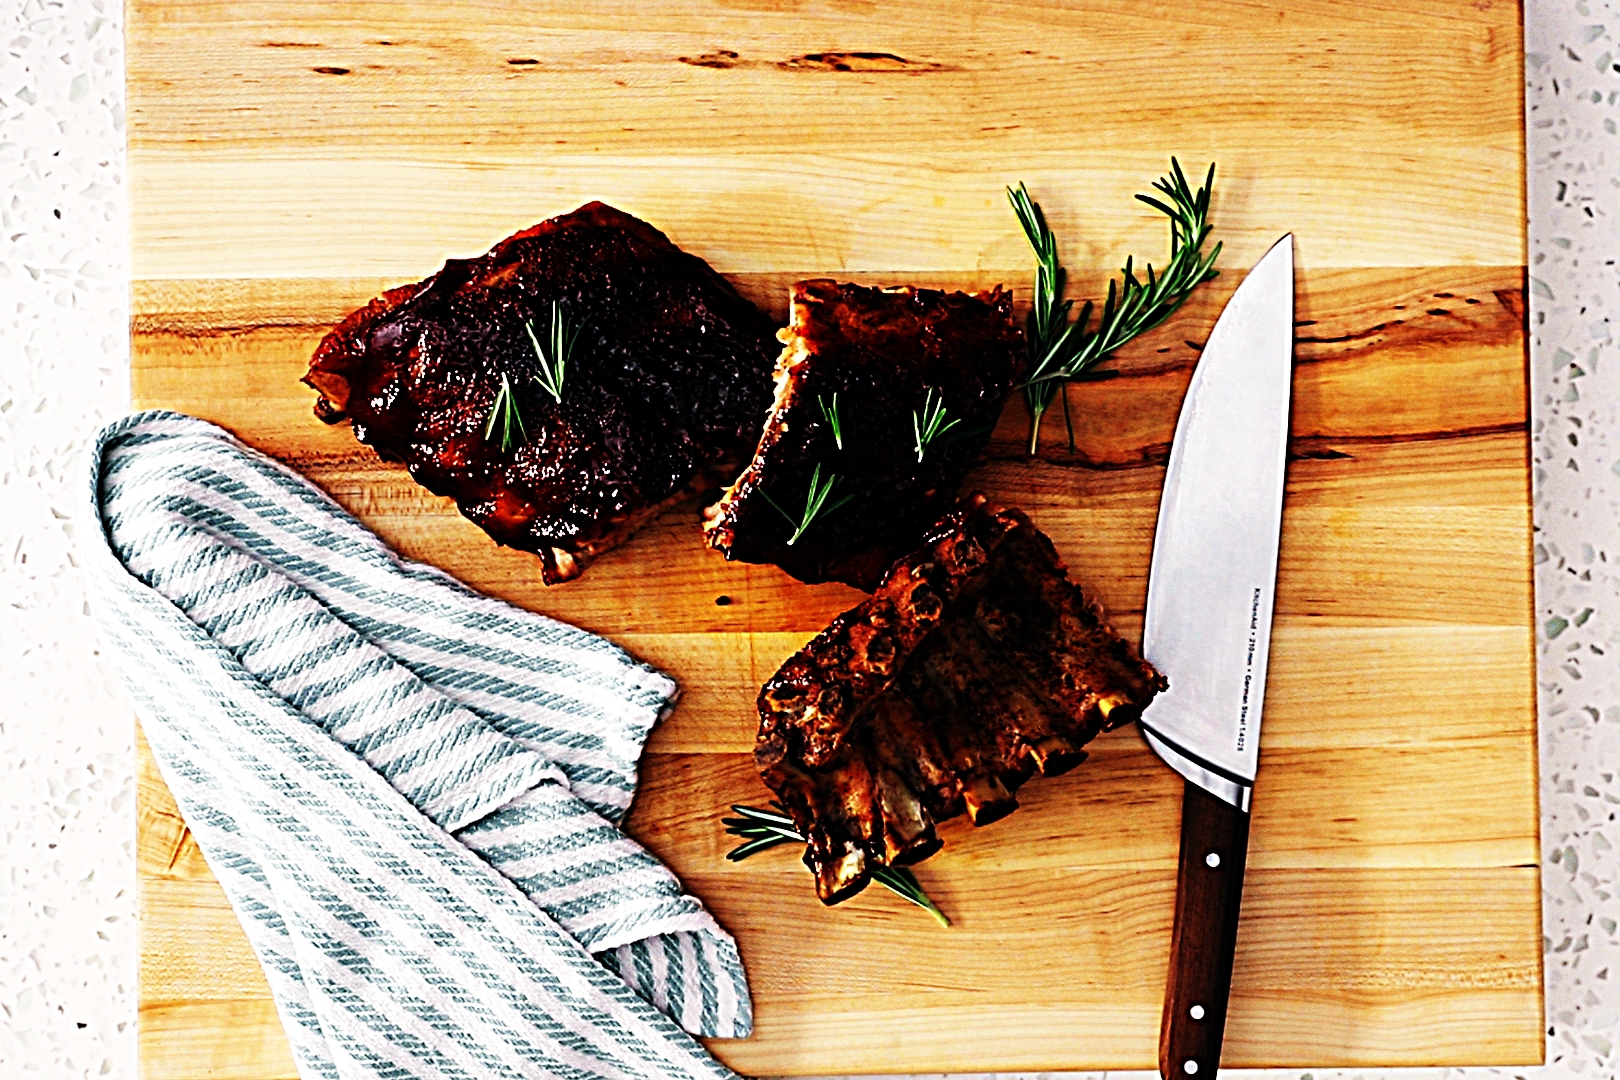 Stupid-Easy Recipe for Oven Baked BBQ Baby Back Ribs (#1 Top-Rated)